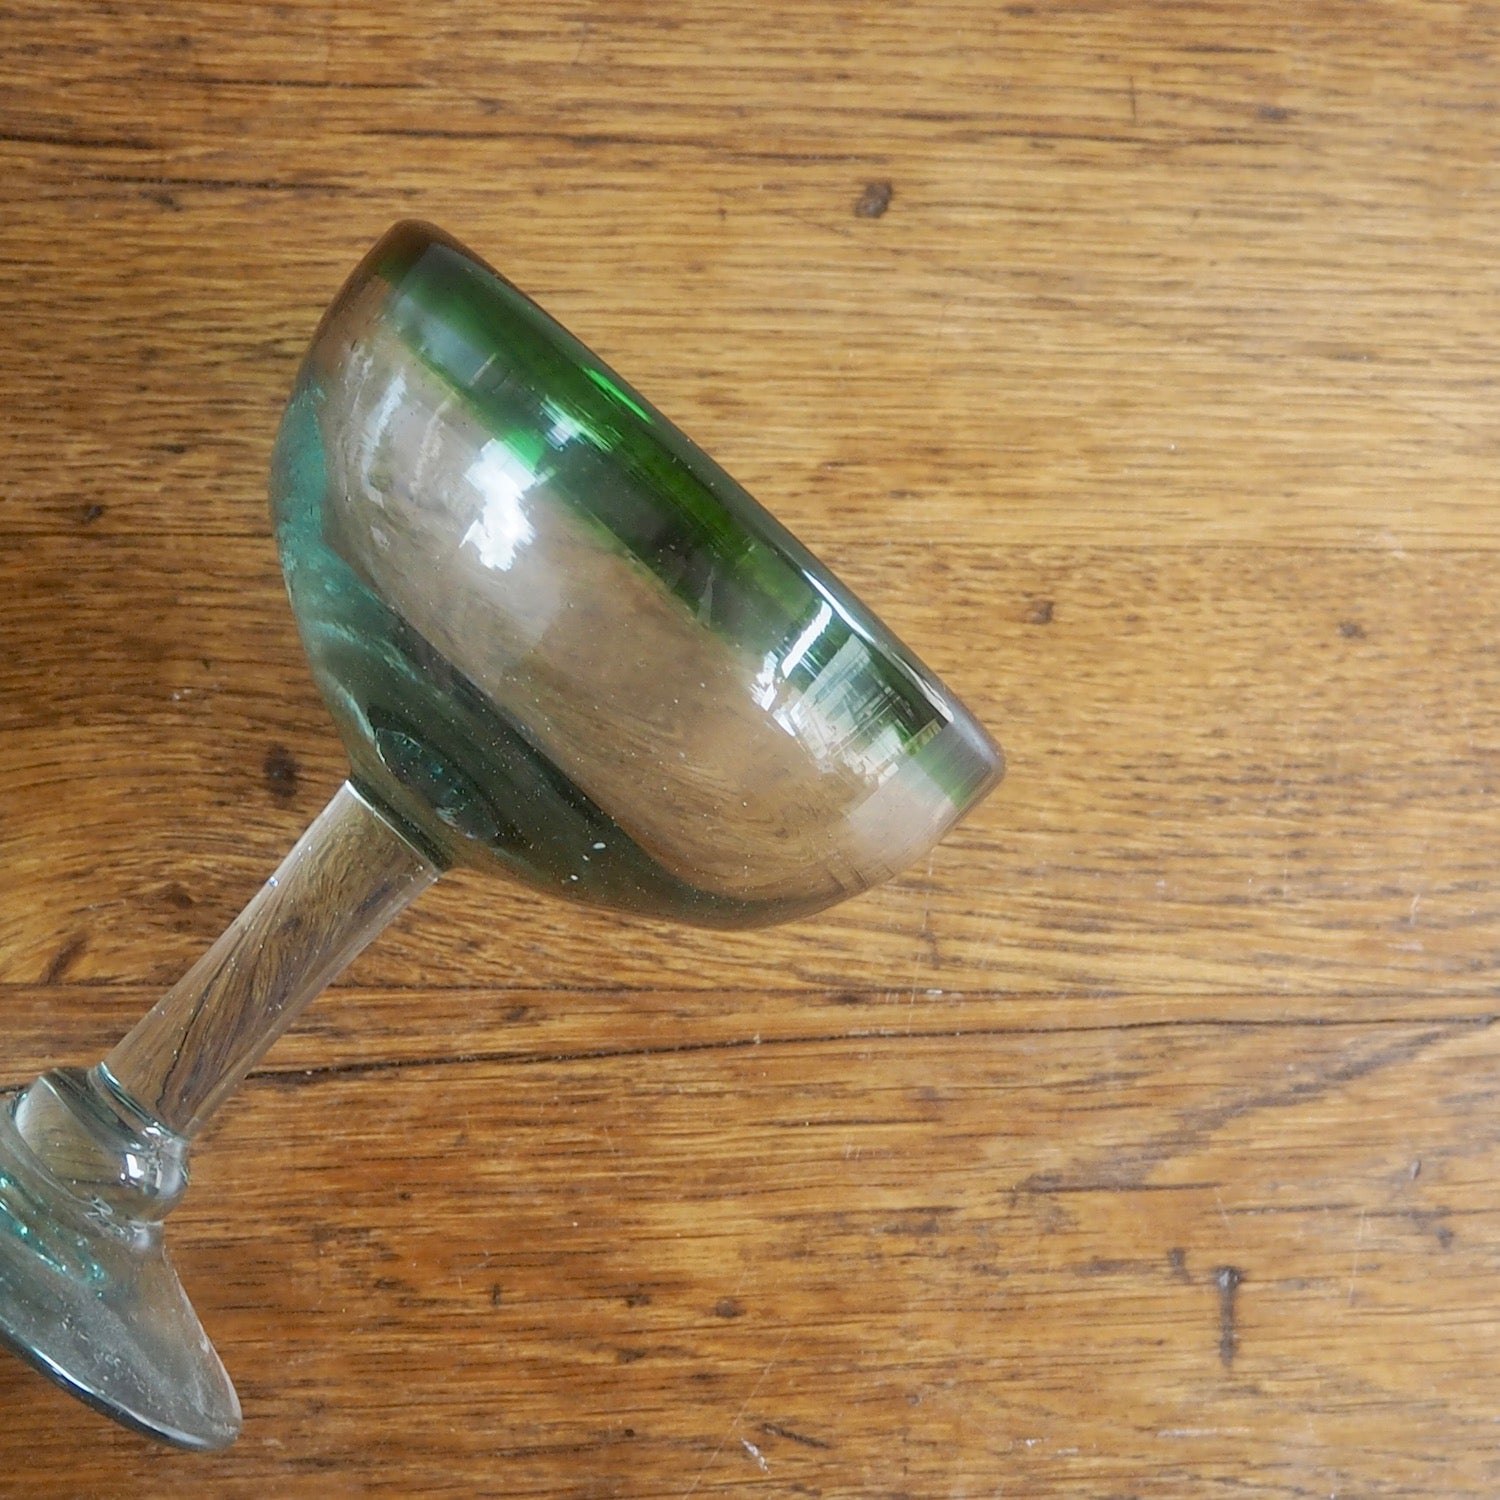 80’s VINTAGE MEXICO-GLASS／GRASS-GREEN2